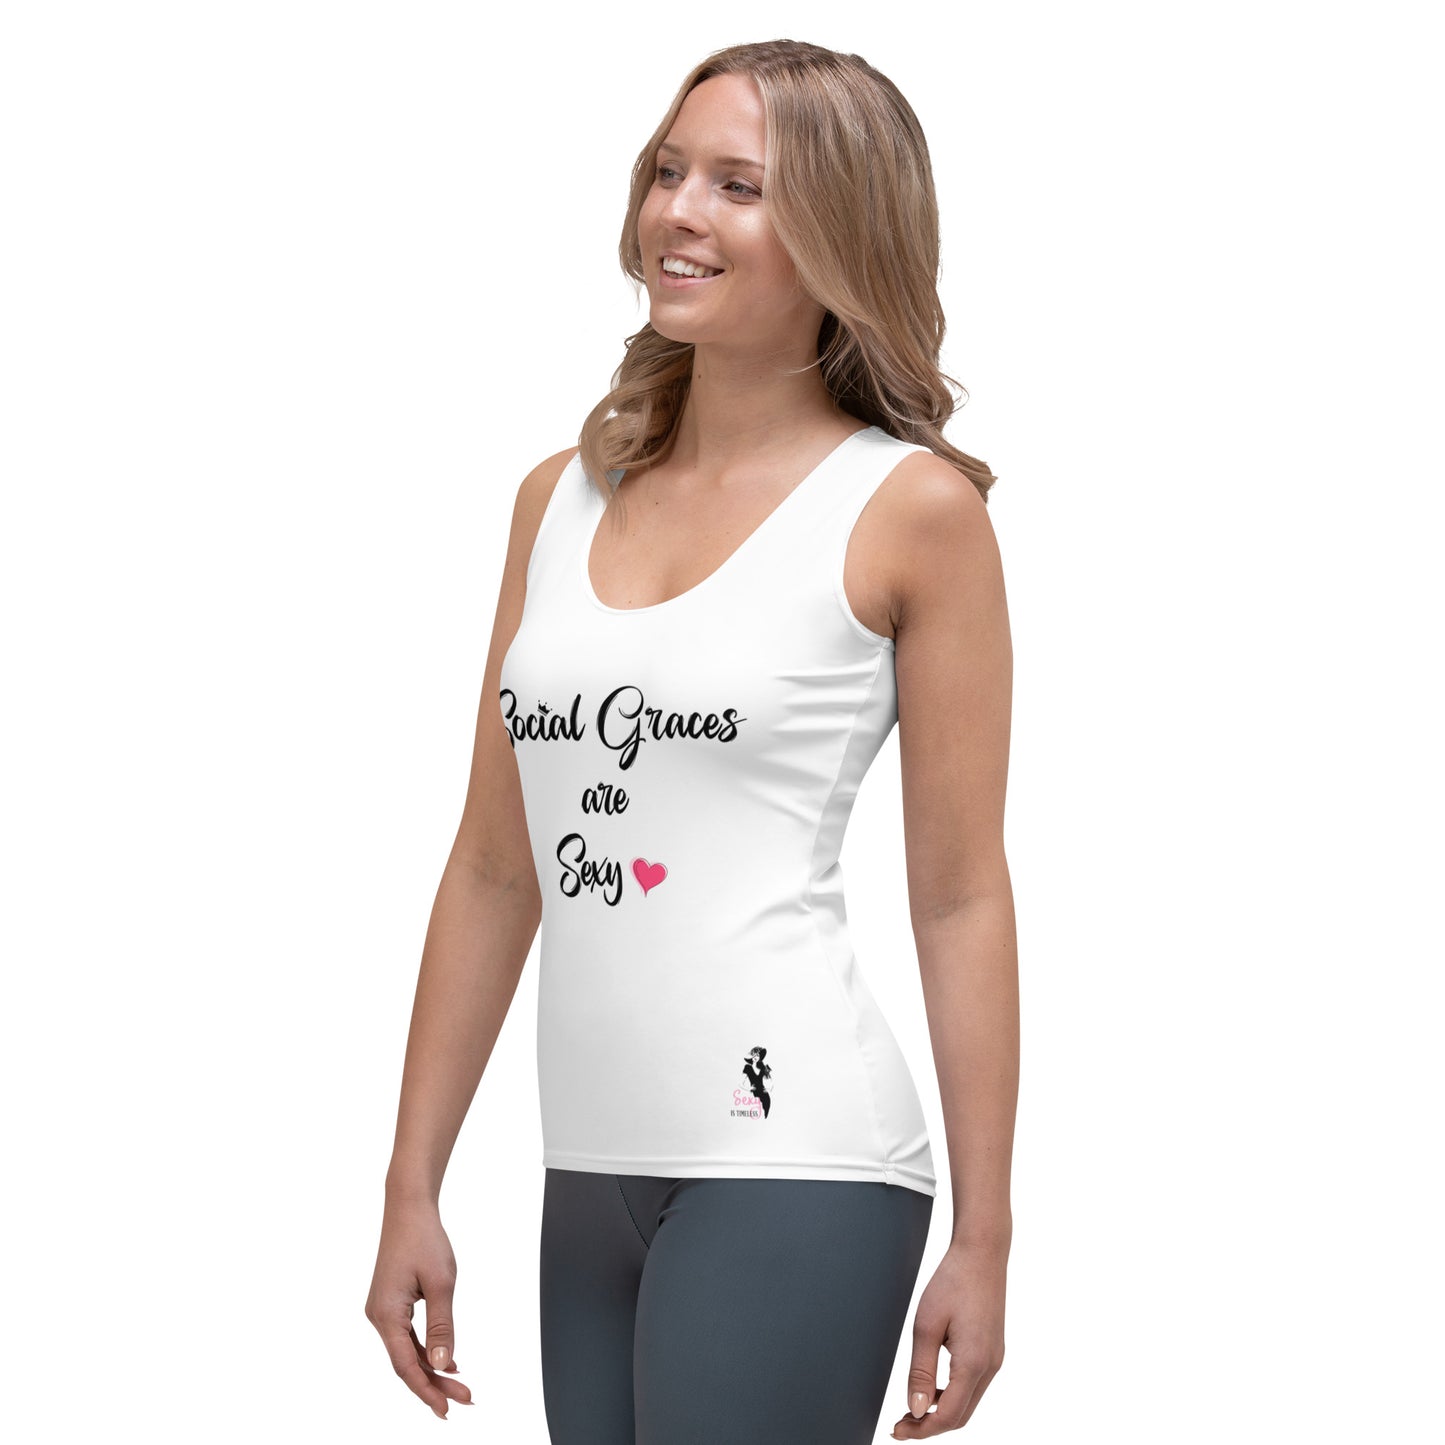 Tank Top - Social graces are Sexy